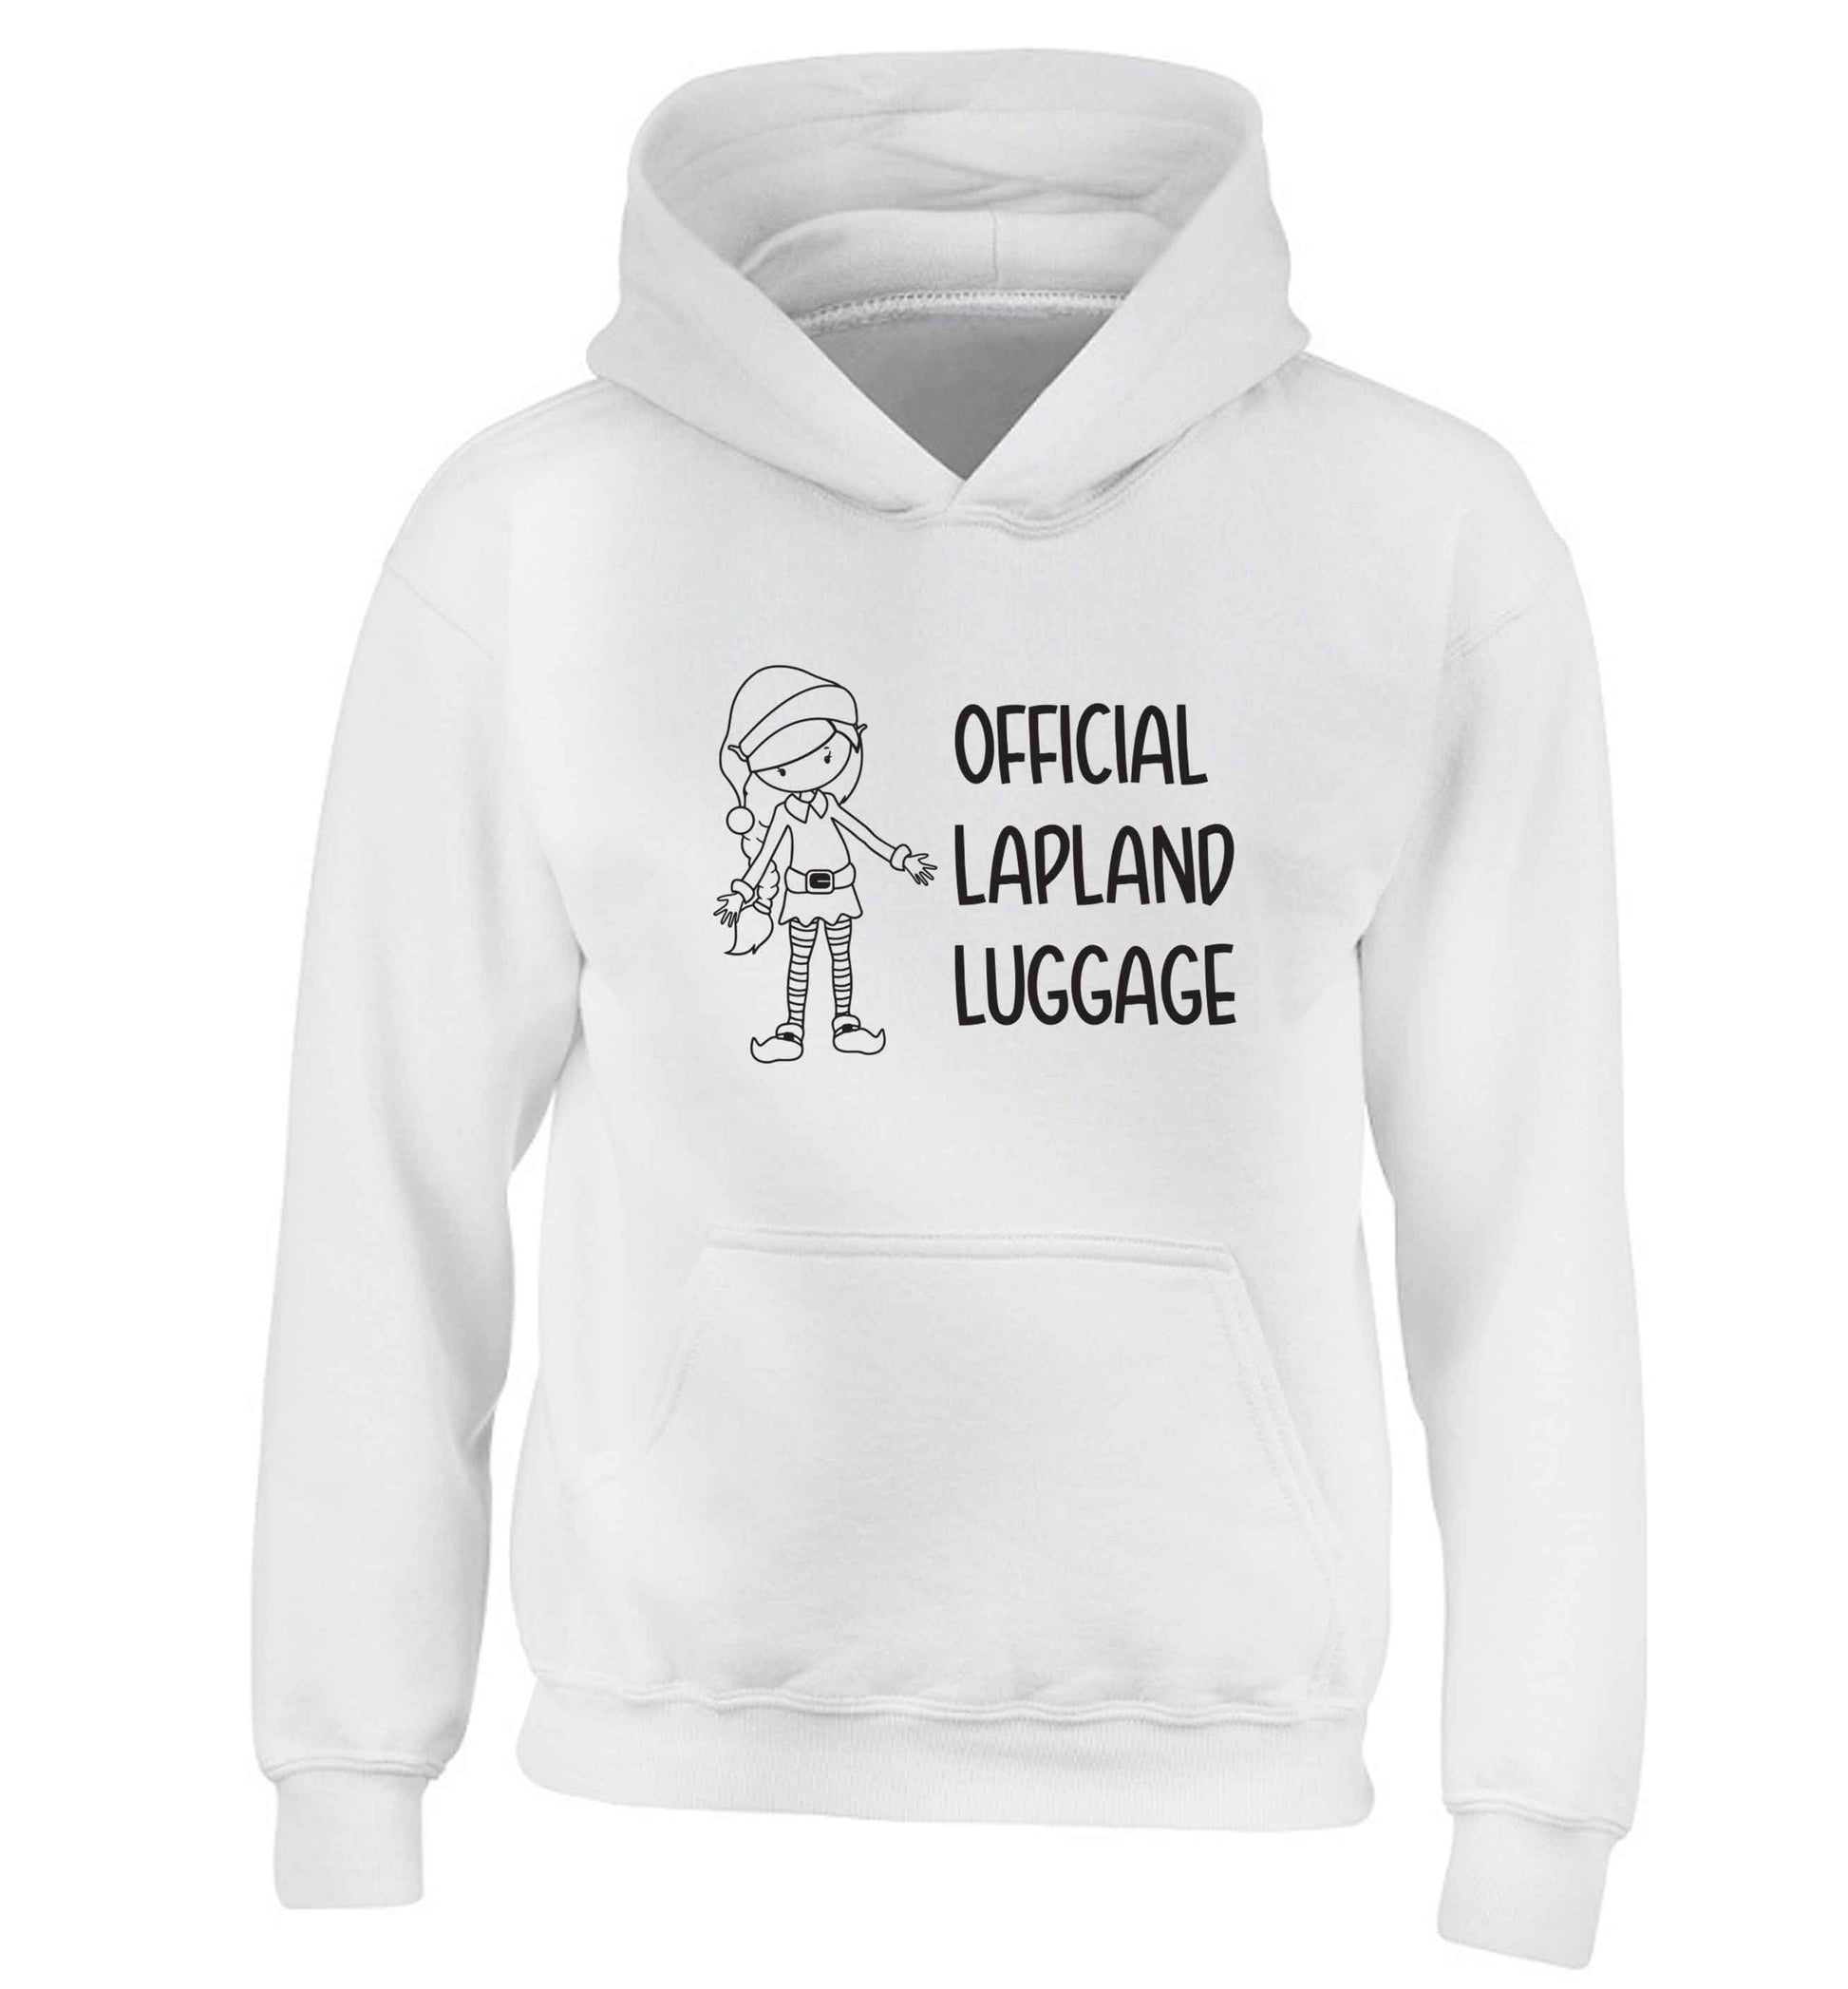 Official lapland luggage - Elf snowflake children's white hoodie 12-13 Years